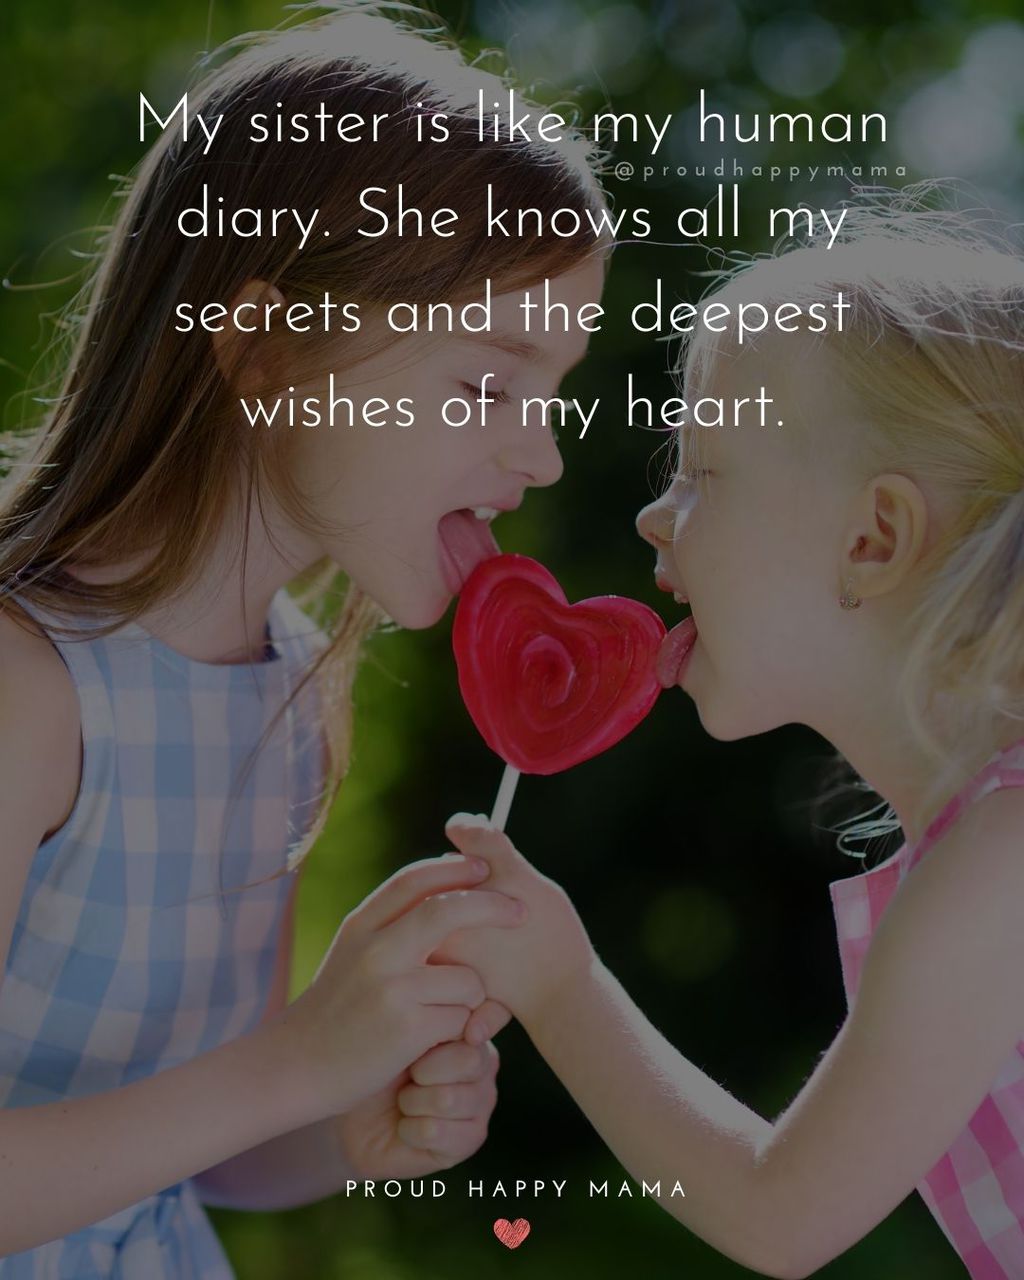 Sister Quotes - My sister is like my human diary. She knows all my secrets and the deepest wishes of my heart.